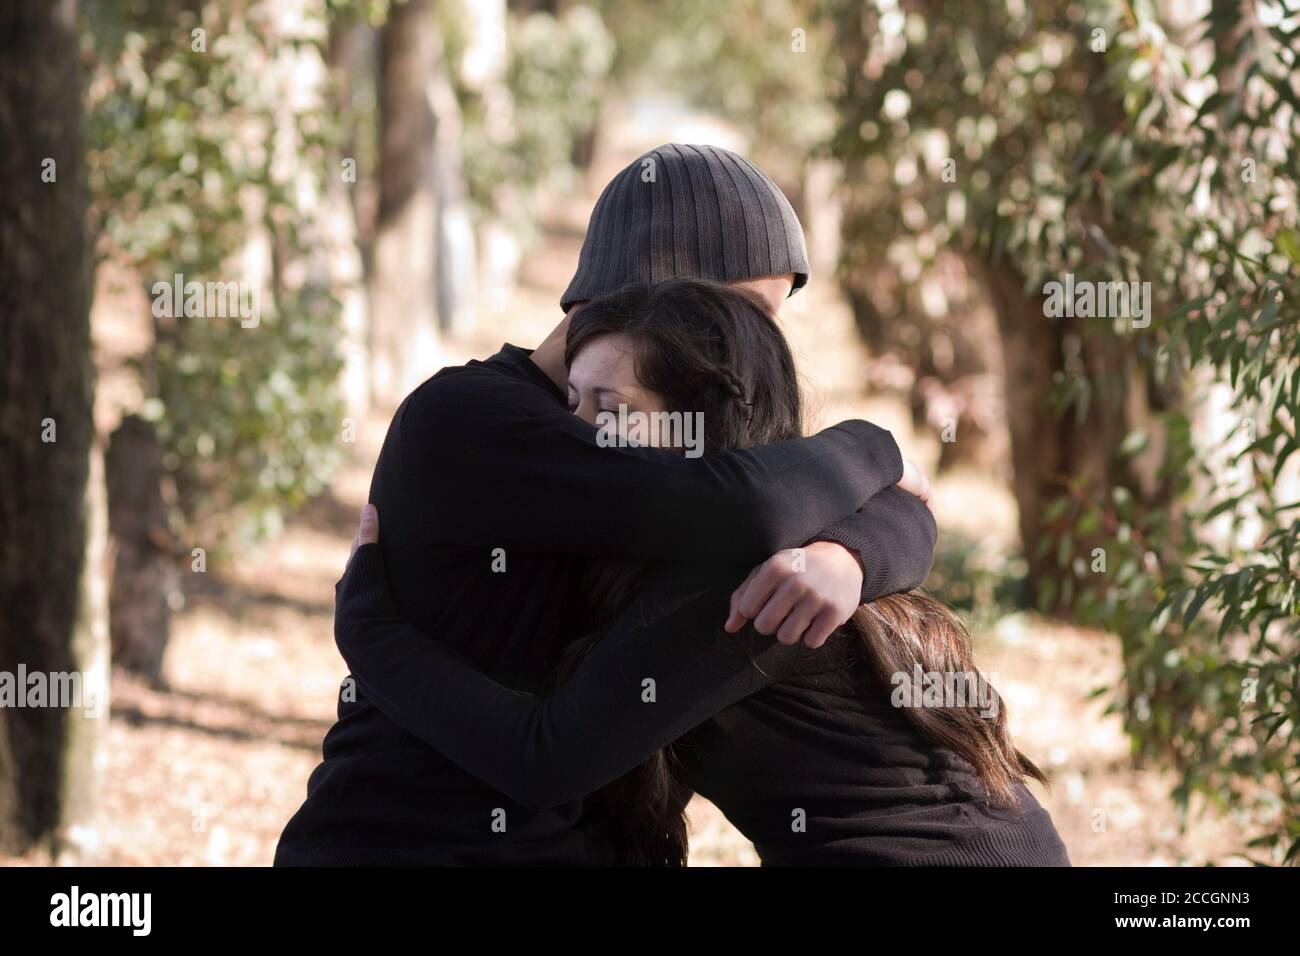 A man and and woman sitting on a park bench embrace. Stock Photo